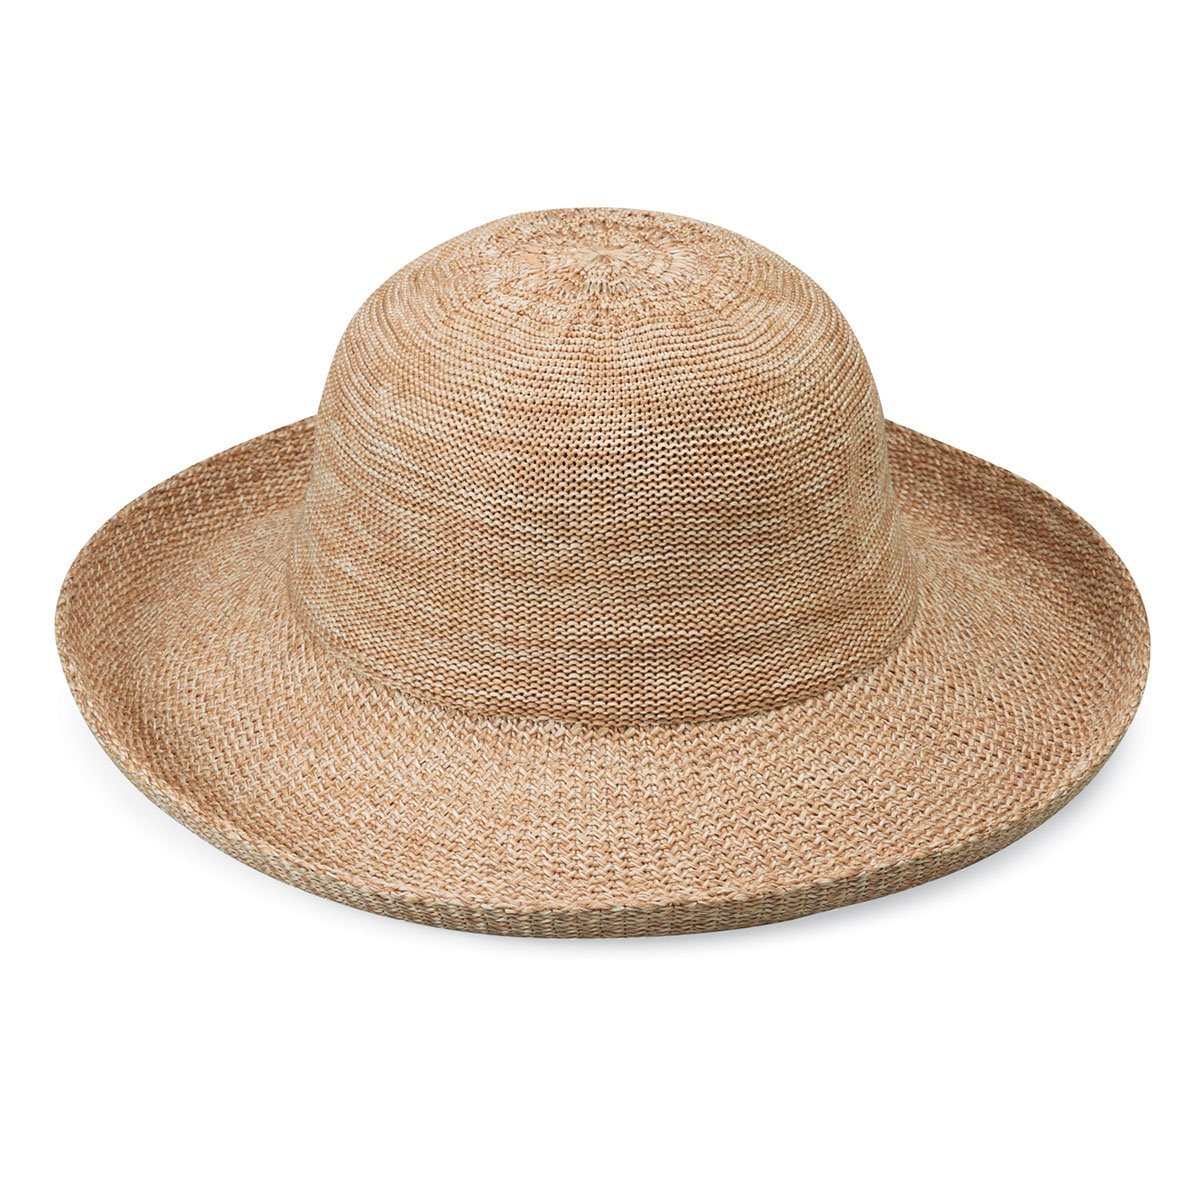 Sun Hats for Women, Hats for Small Heads